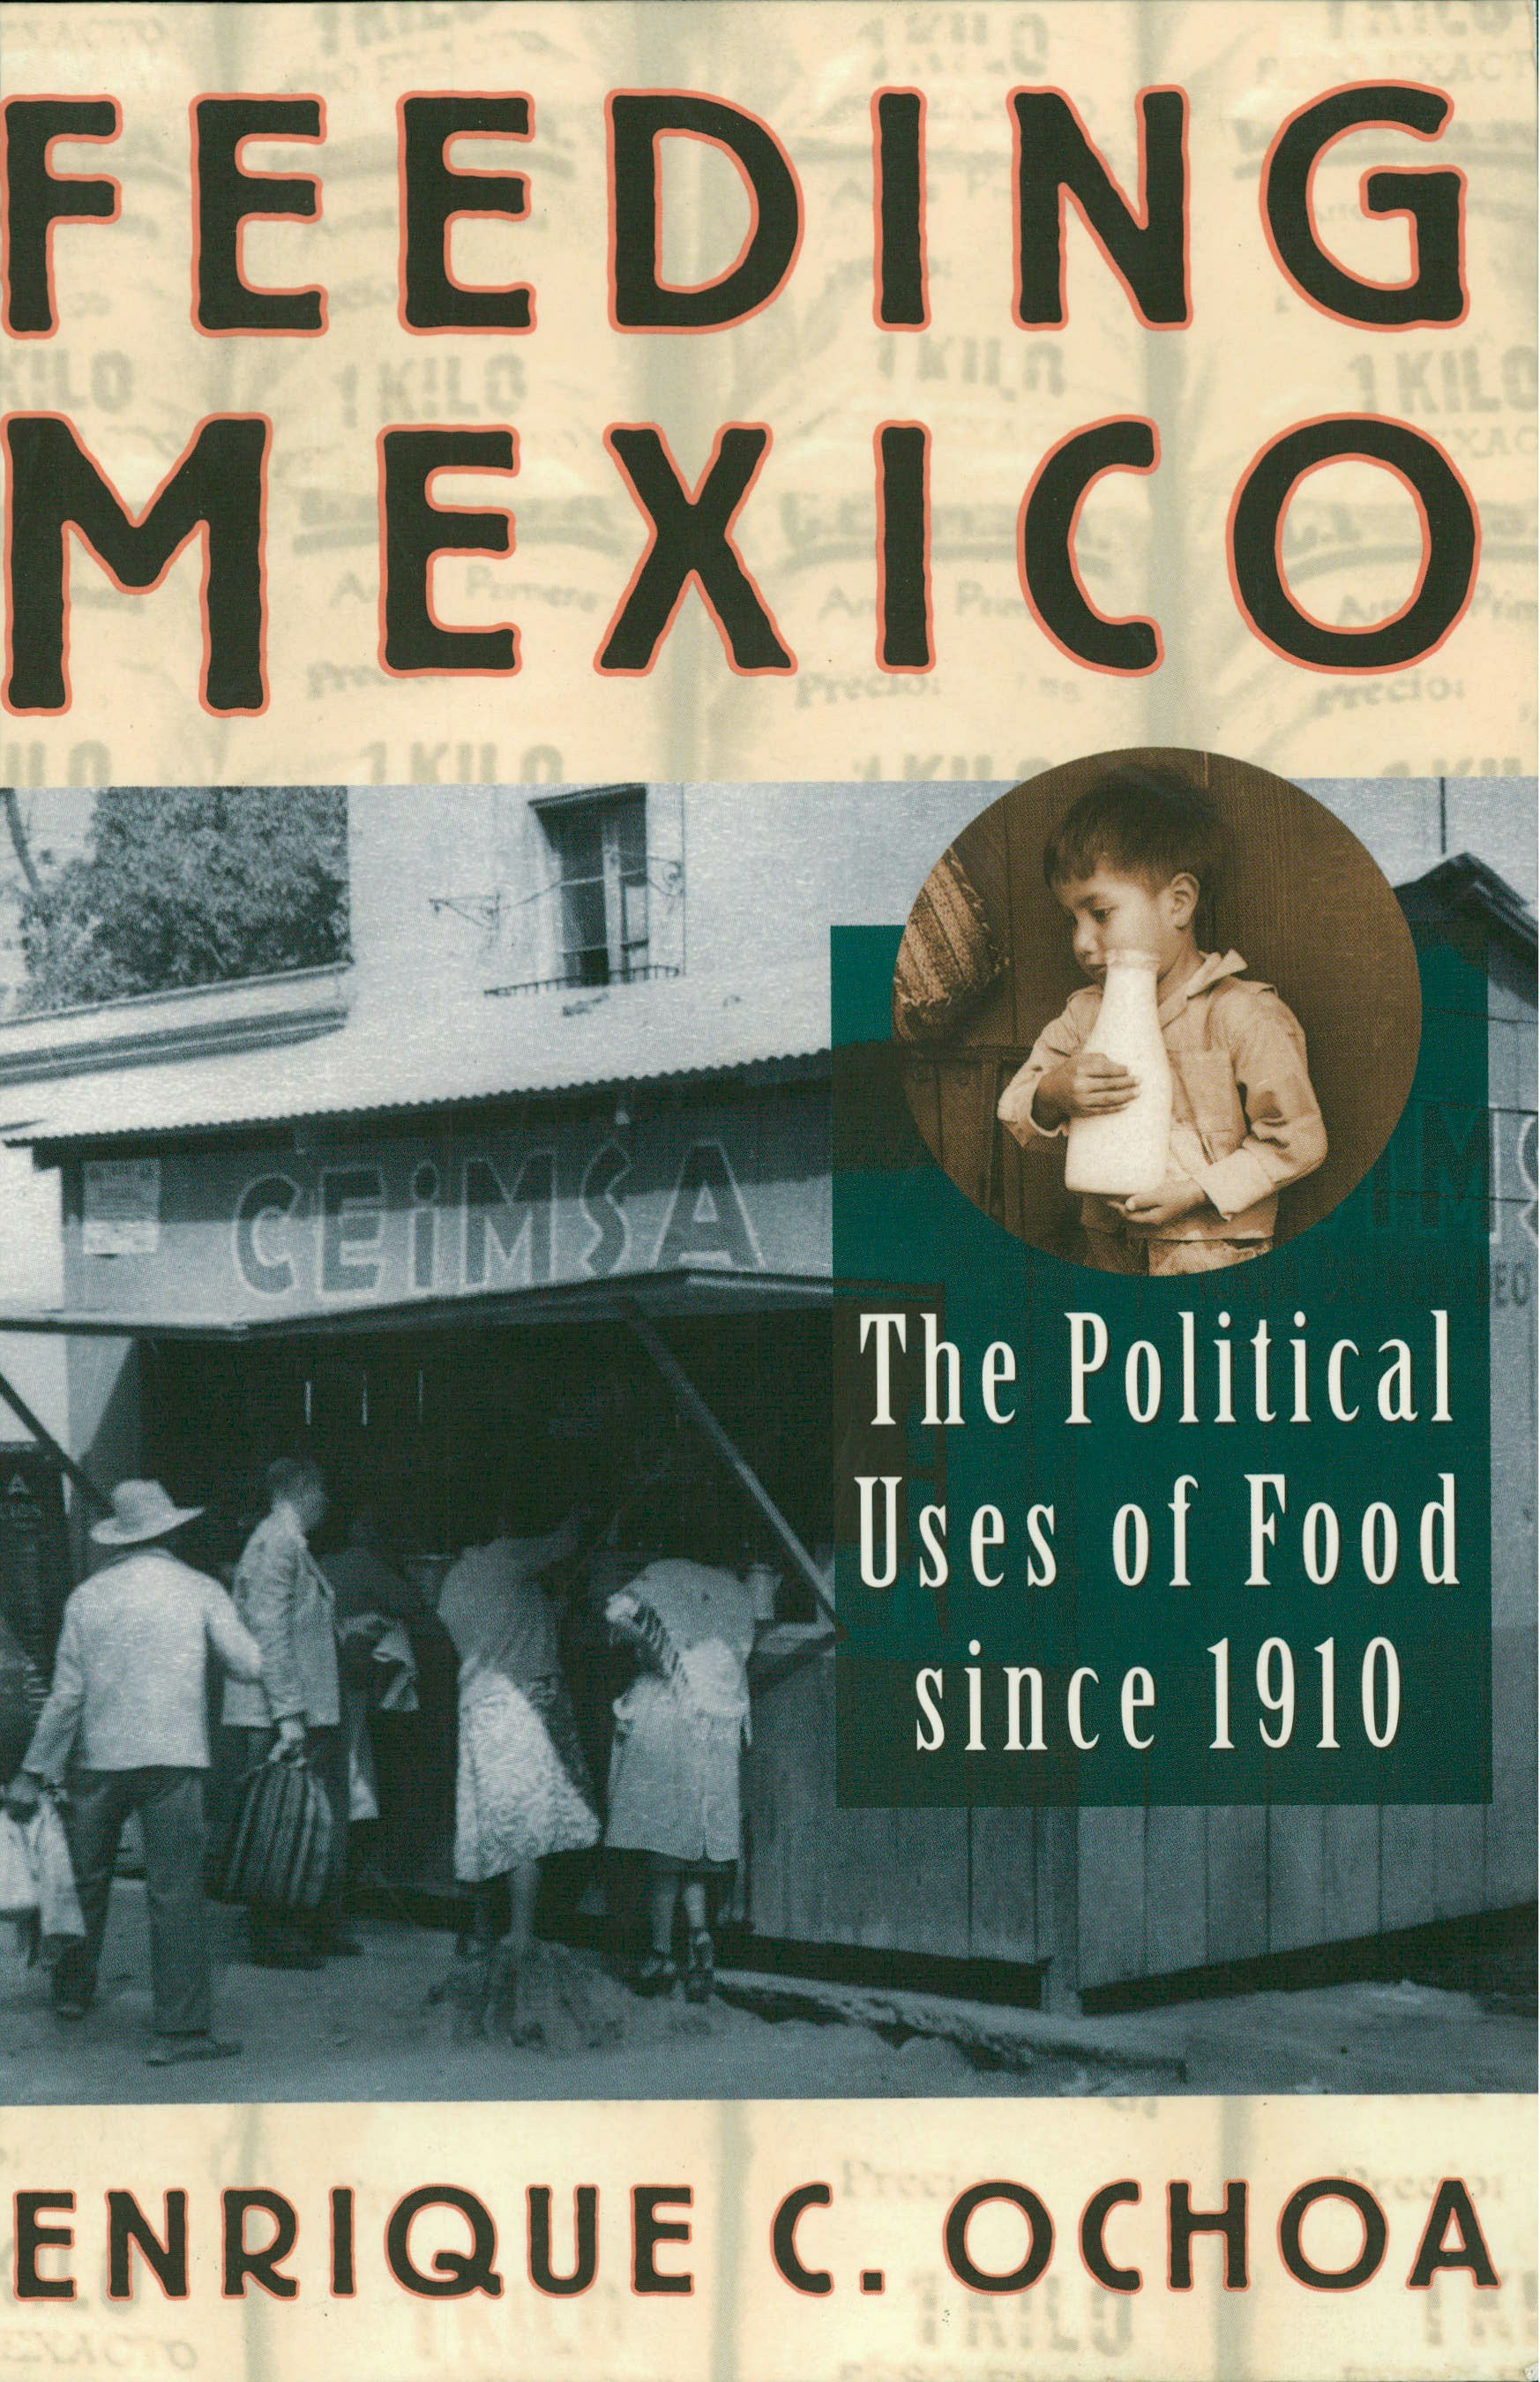 Feeding Mexico: The Political Uses of Food since 1910